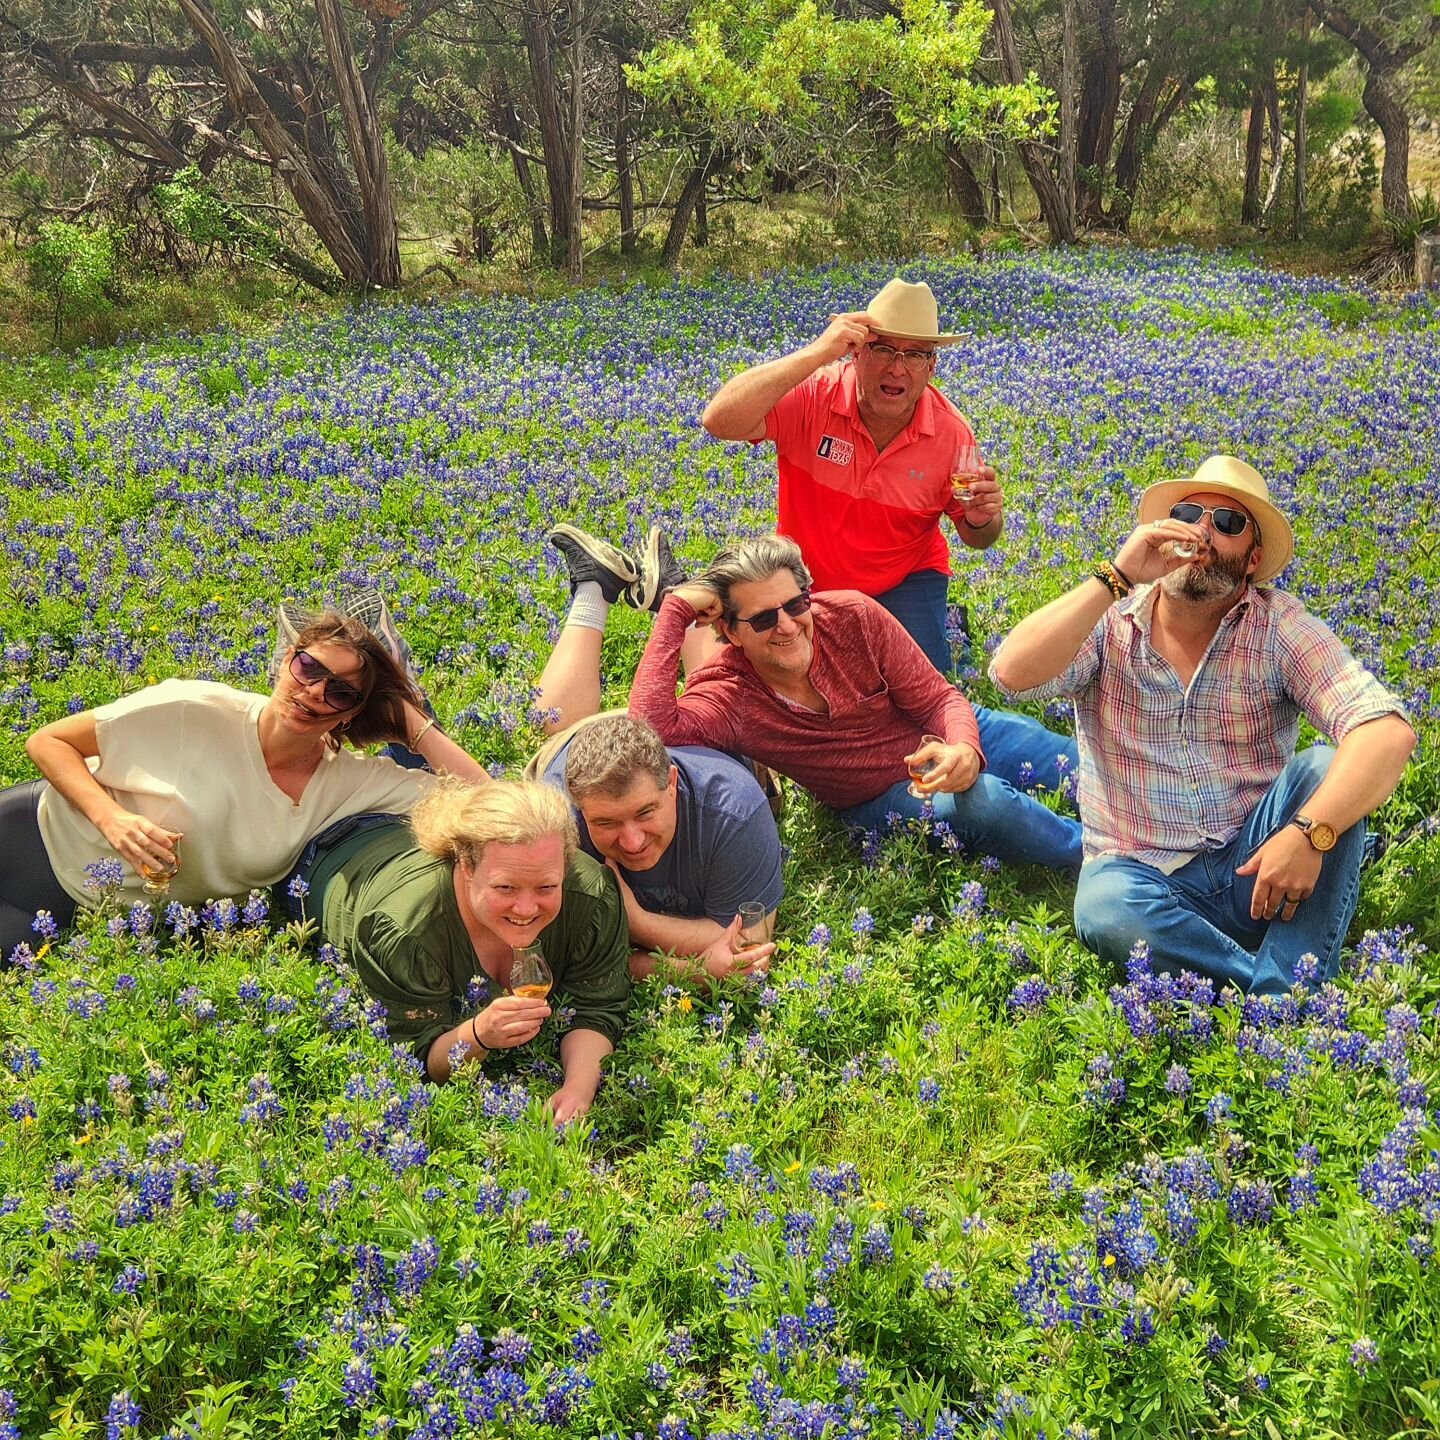 We needed a photo as beautiful as the whiskeys judged. So bluebonnets...

Winners are to be announced in the next couple of weeks. 

📷: @rdwhittington, thanks for taking the photo and hosting us at @austinwizardacademy 

#txwhiskeyfest
#texaswhiskey